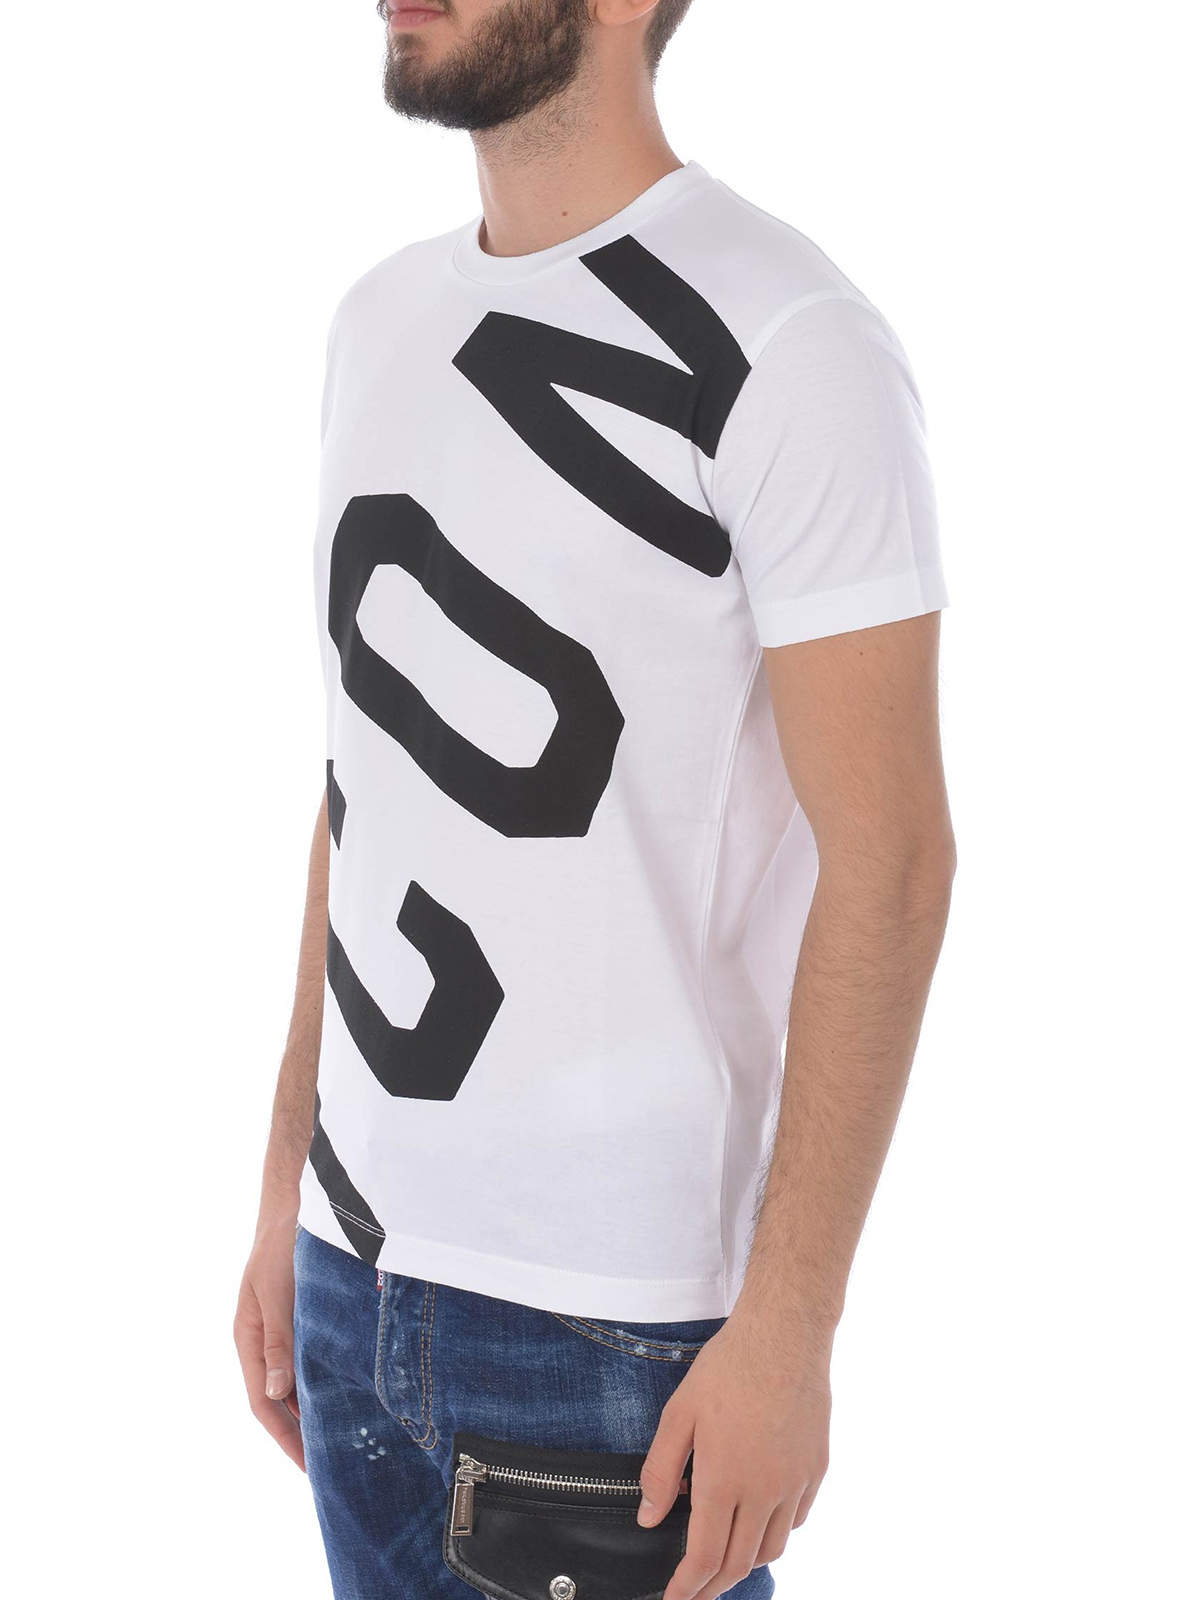 t shirt icon dsquared